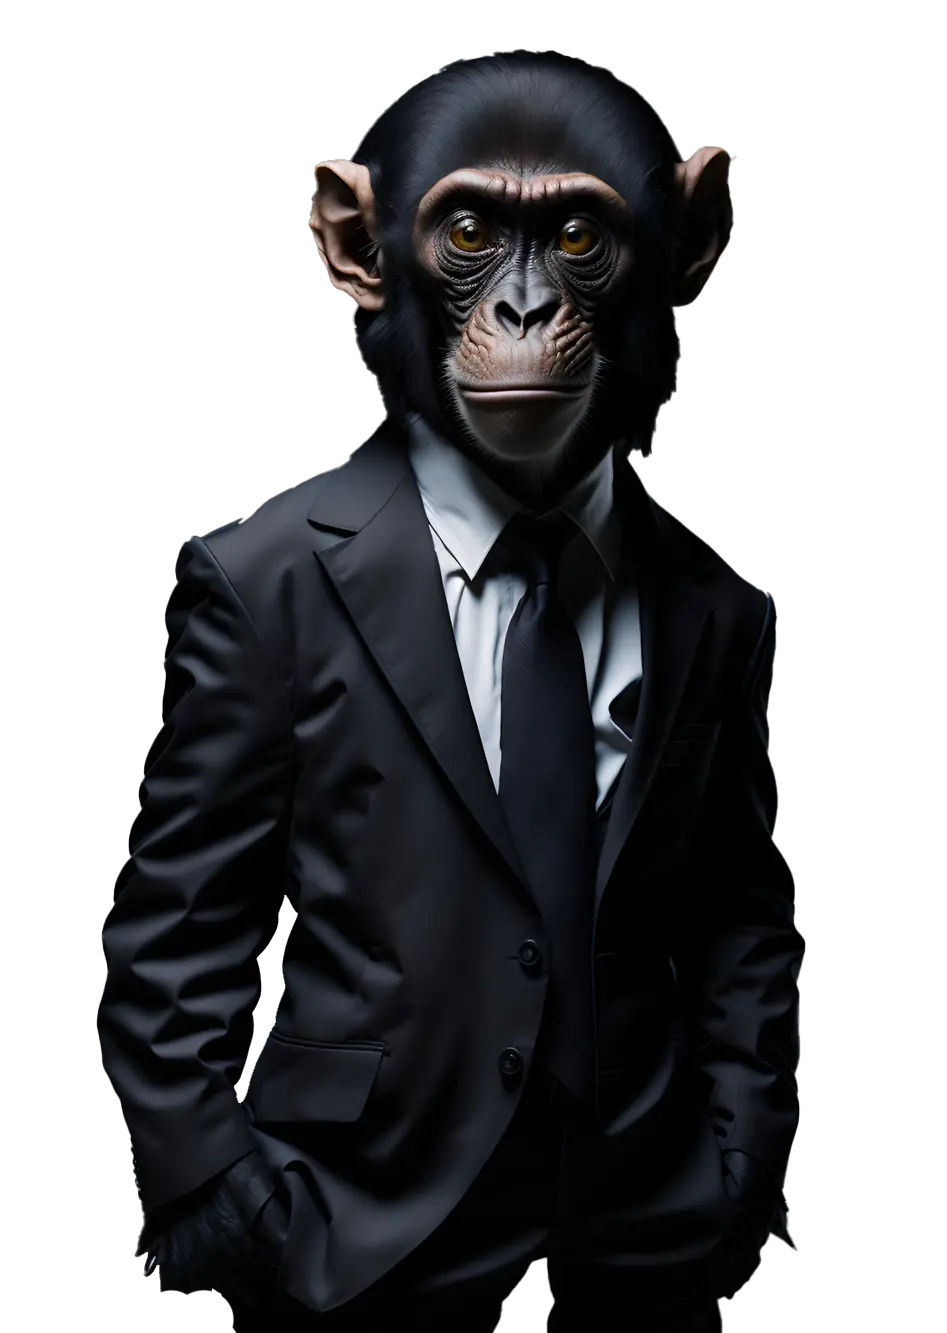 A monkey in a business suit